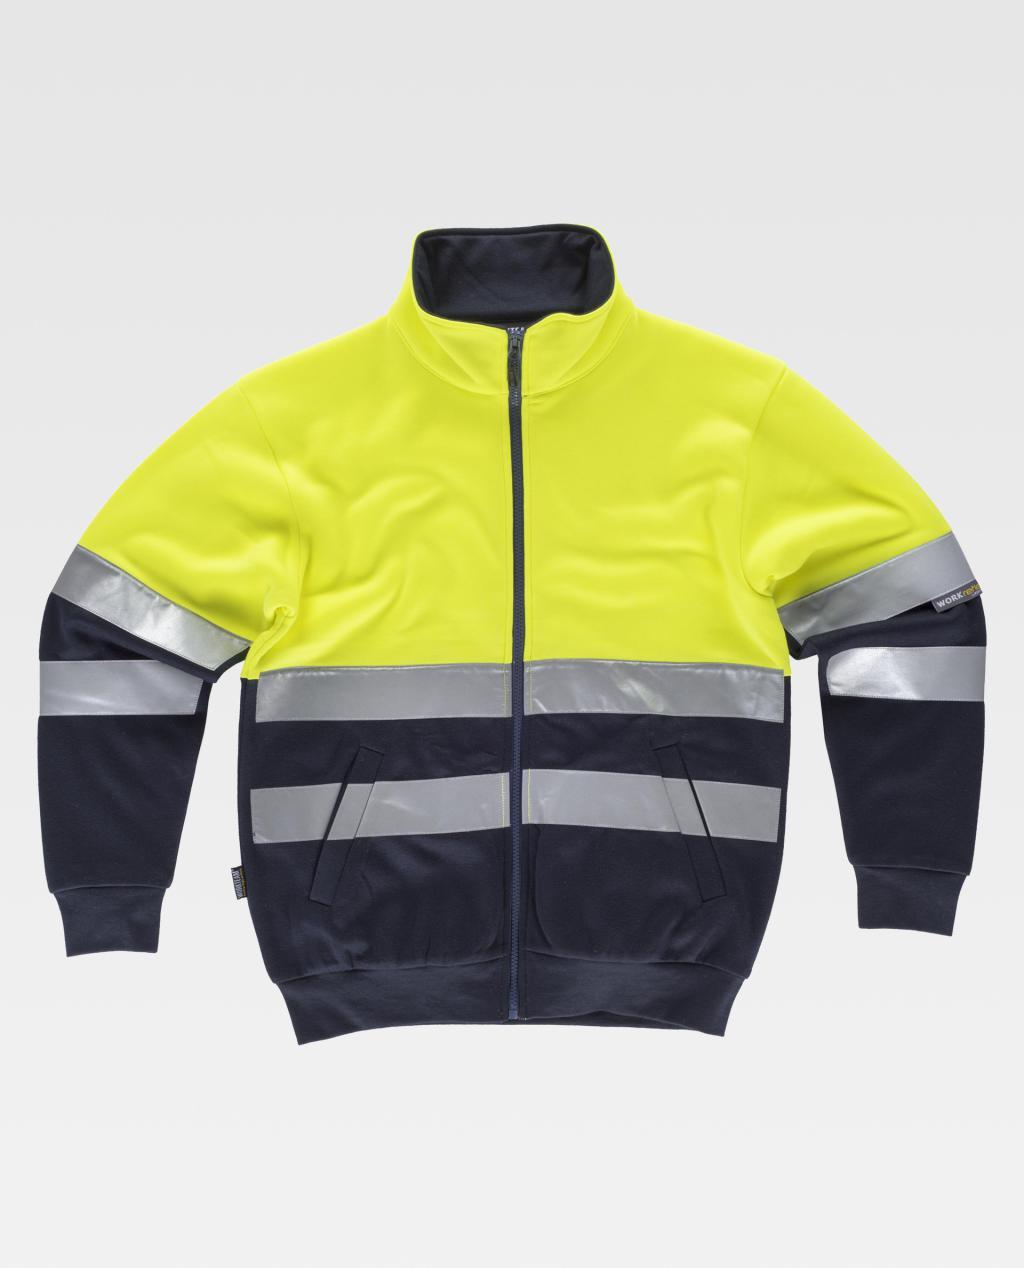 Round Neck Zip Up Jacket with high Visibility Stripes (EU Compliant)